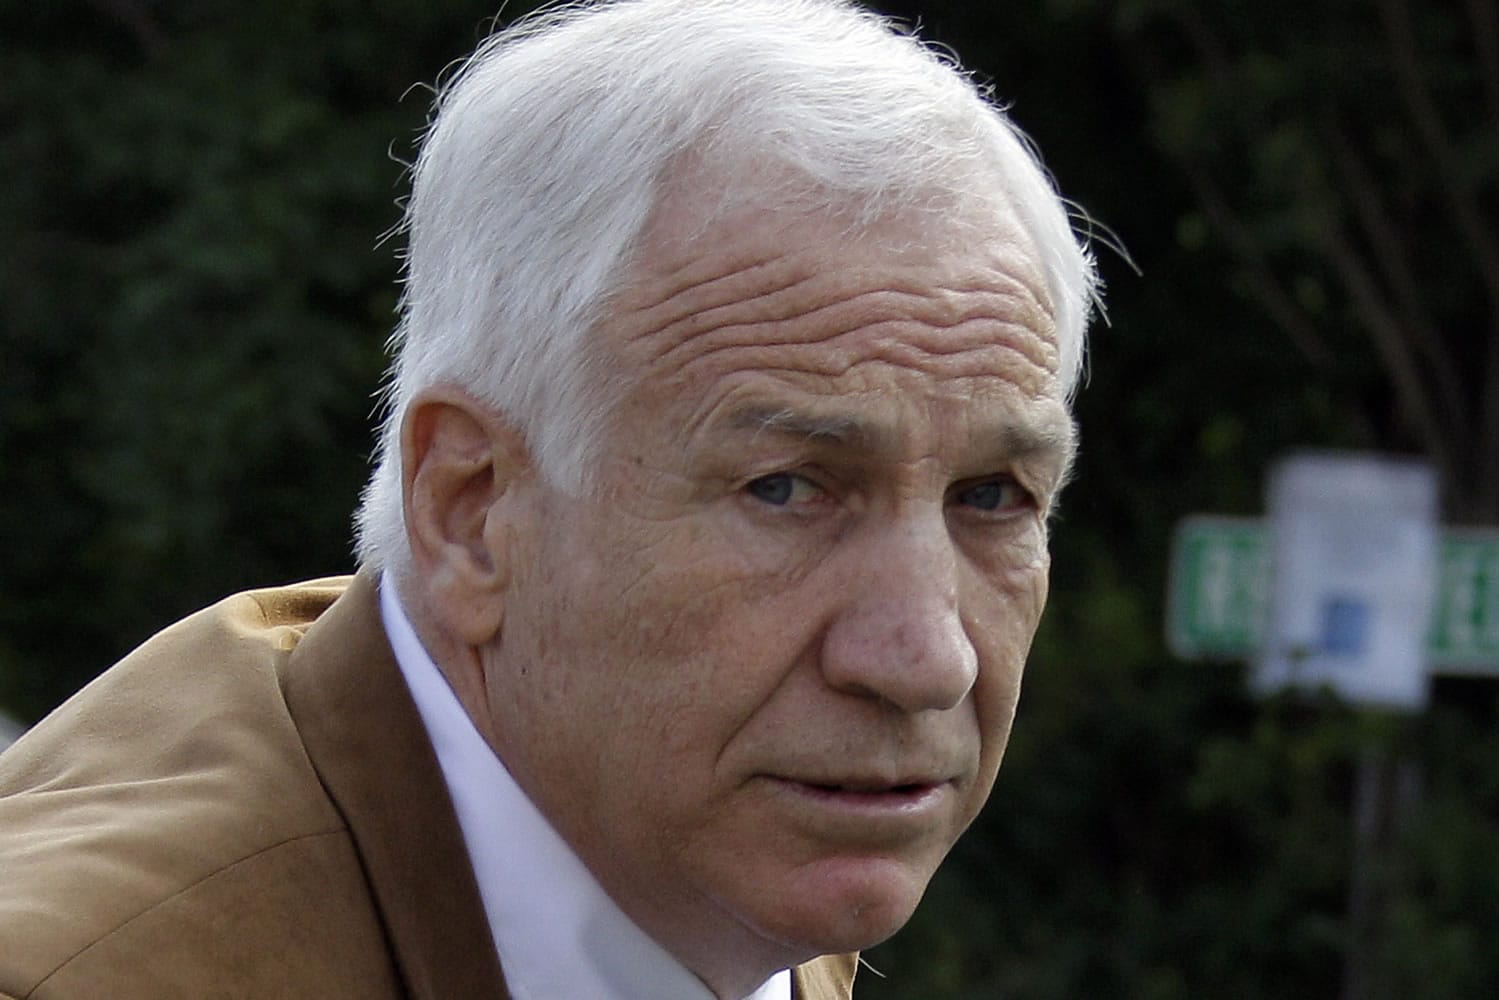 Former Penn State assistant football coach Jerry Sandusky arrives at the Centre County Courthouse in Bellefonte, Pa., June 22, 2012.